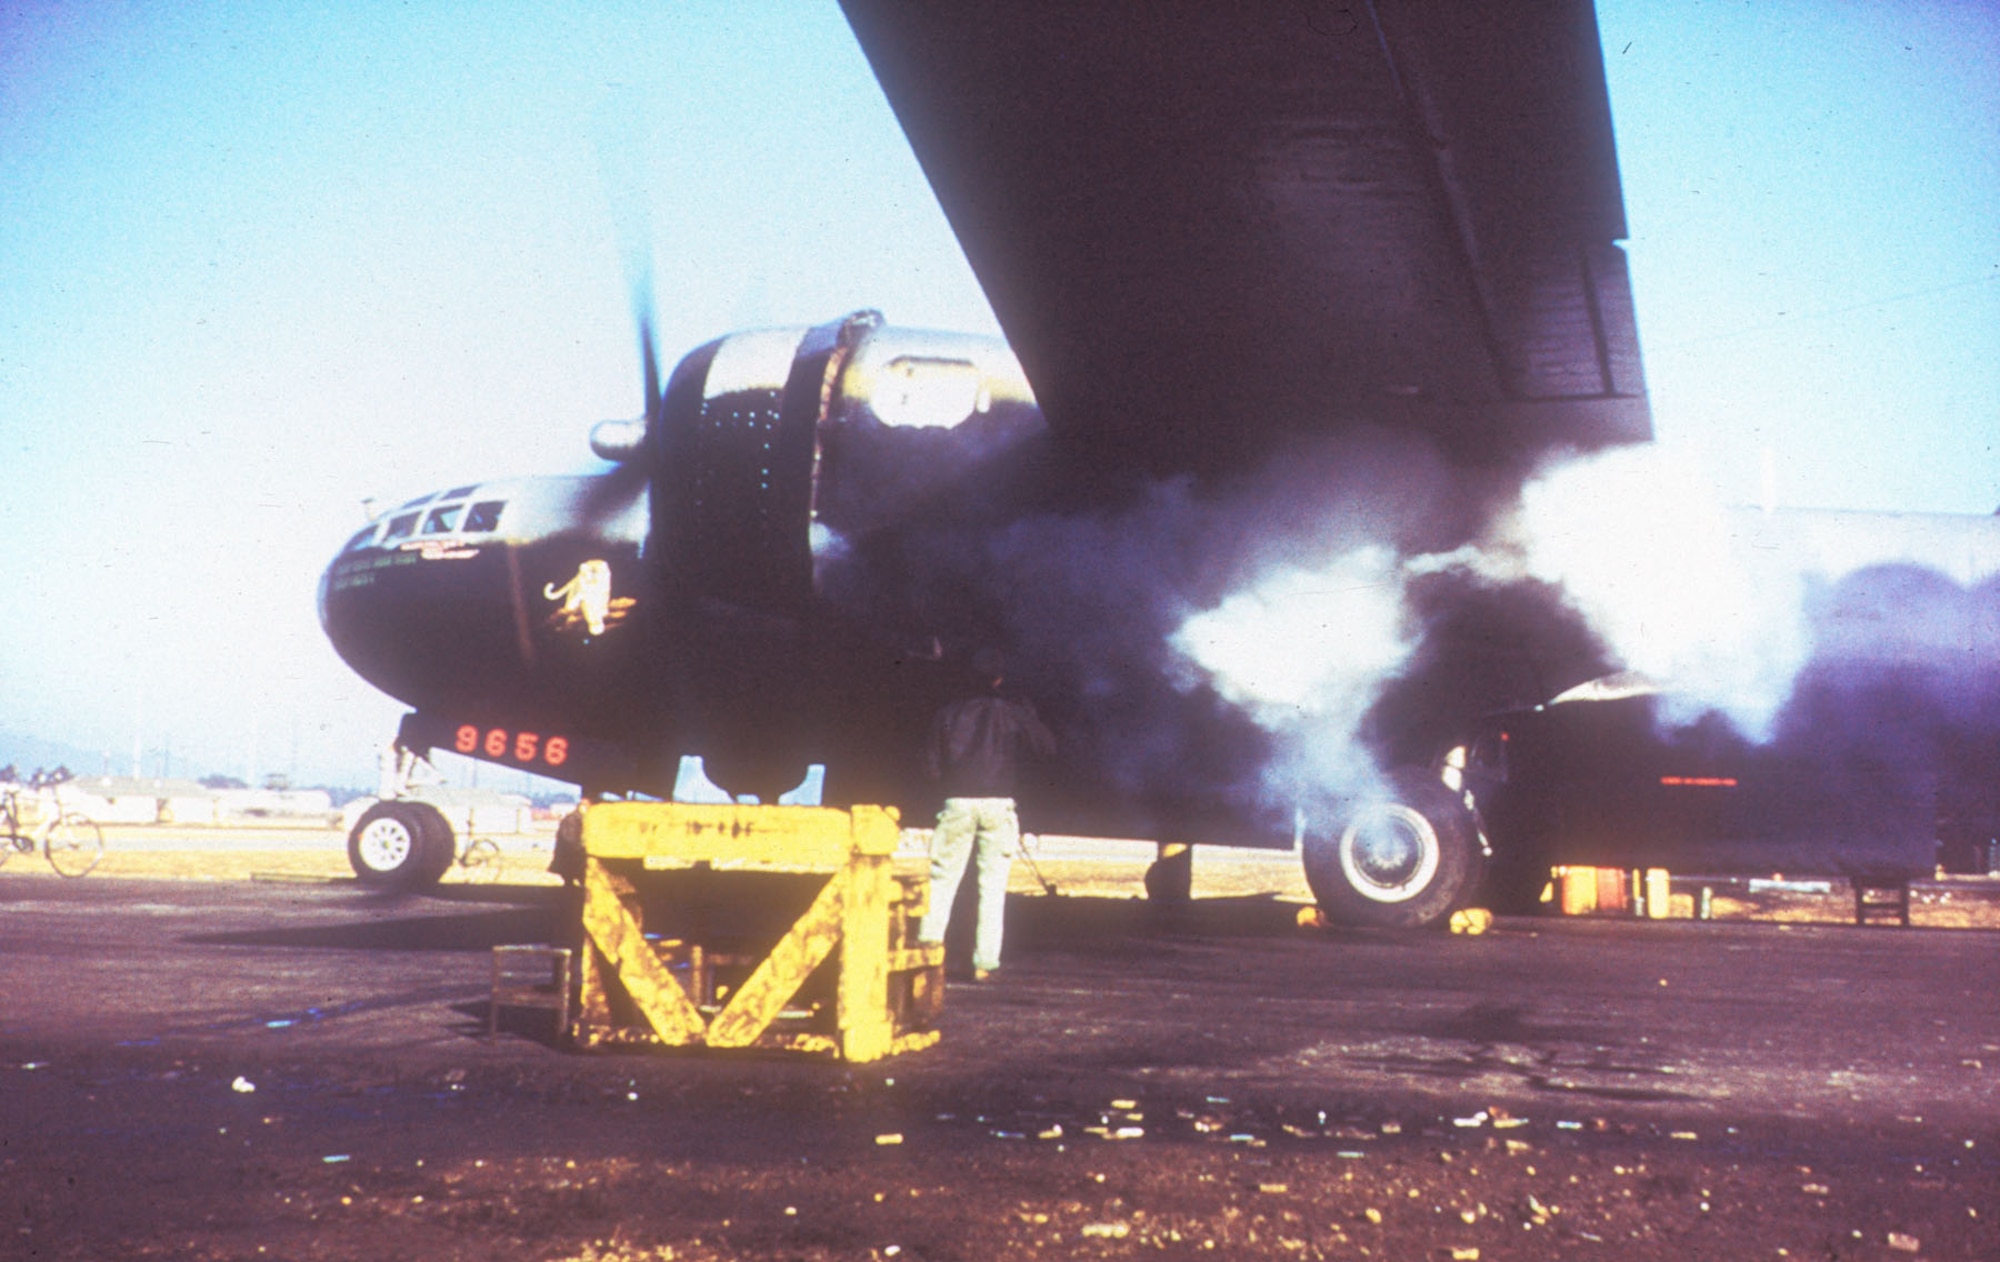 Belching smoke, engine No. 1 roars into life in preparation for takeoff. (U.S. Air Force photo)